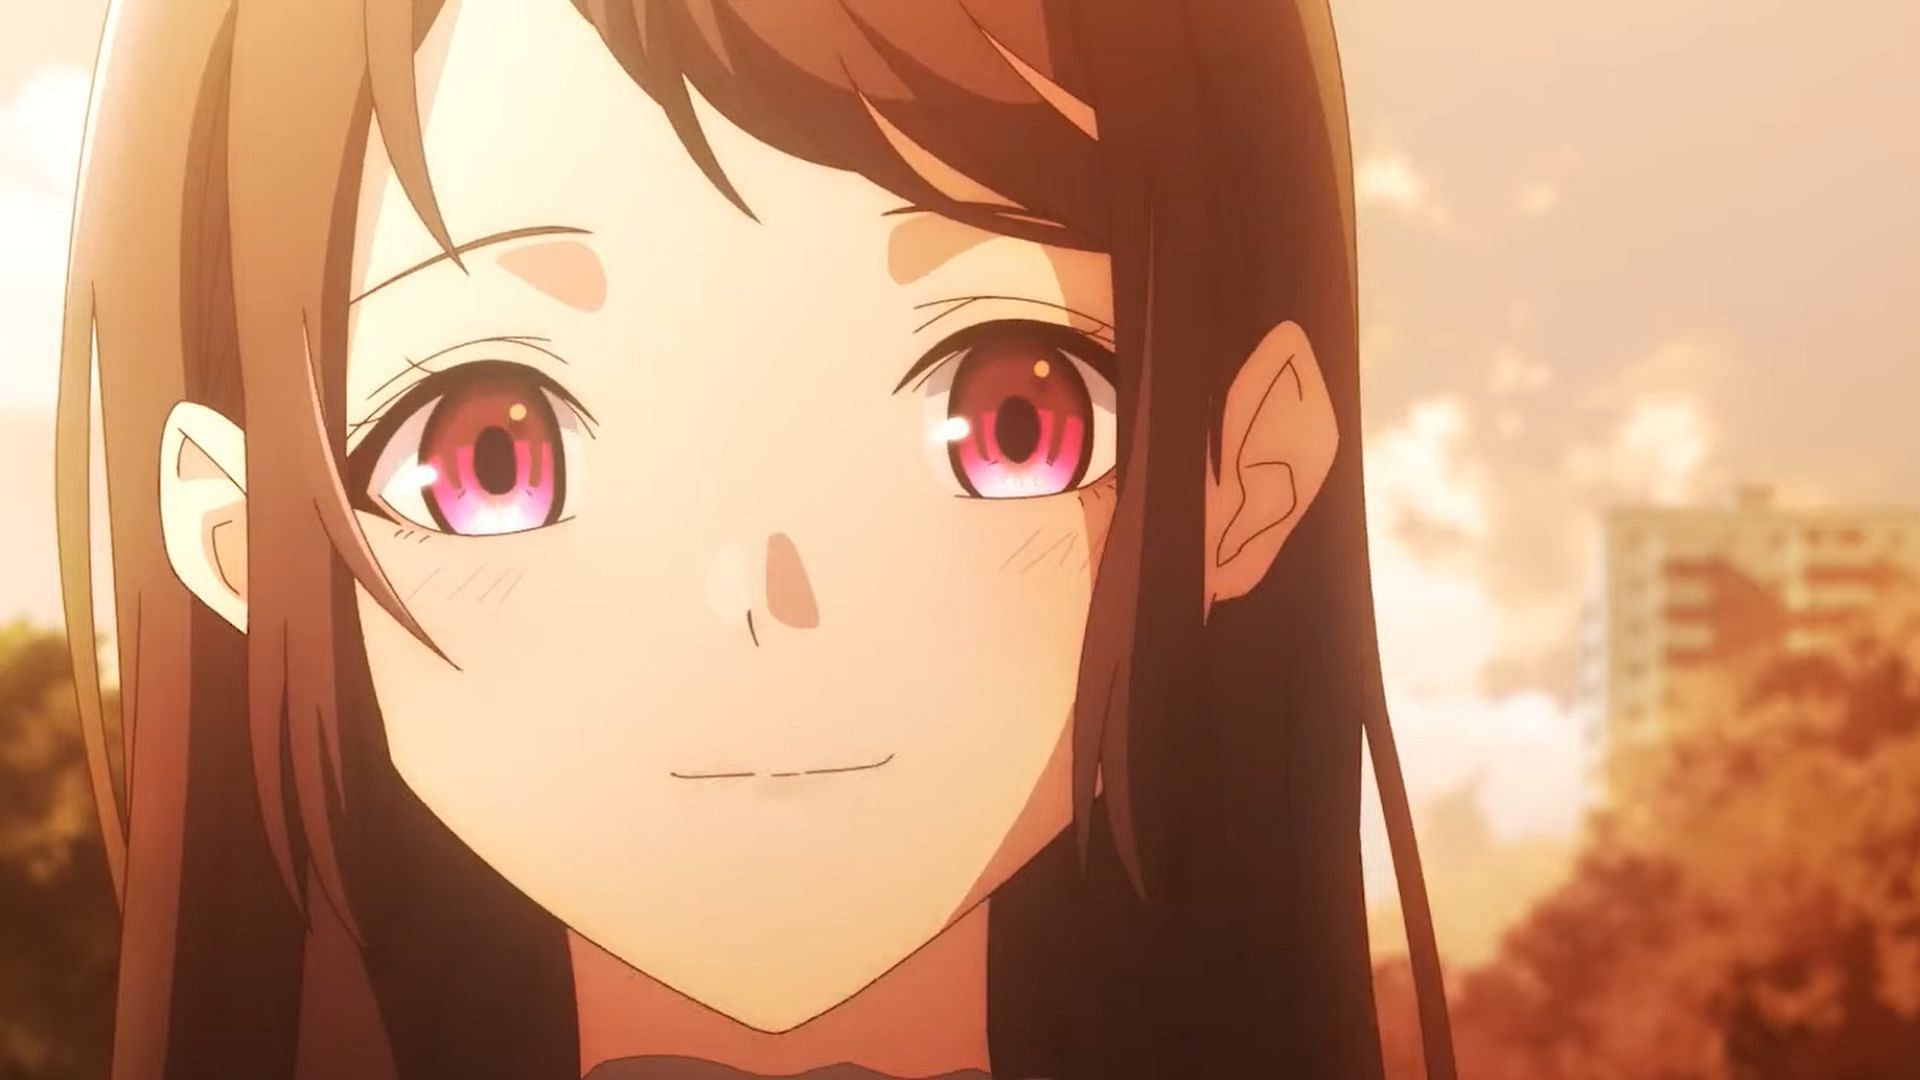 Kaori as seen in I Got a Cheat Skill in Another World episode 5 (Image via Millepensee)